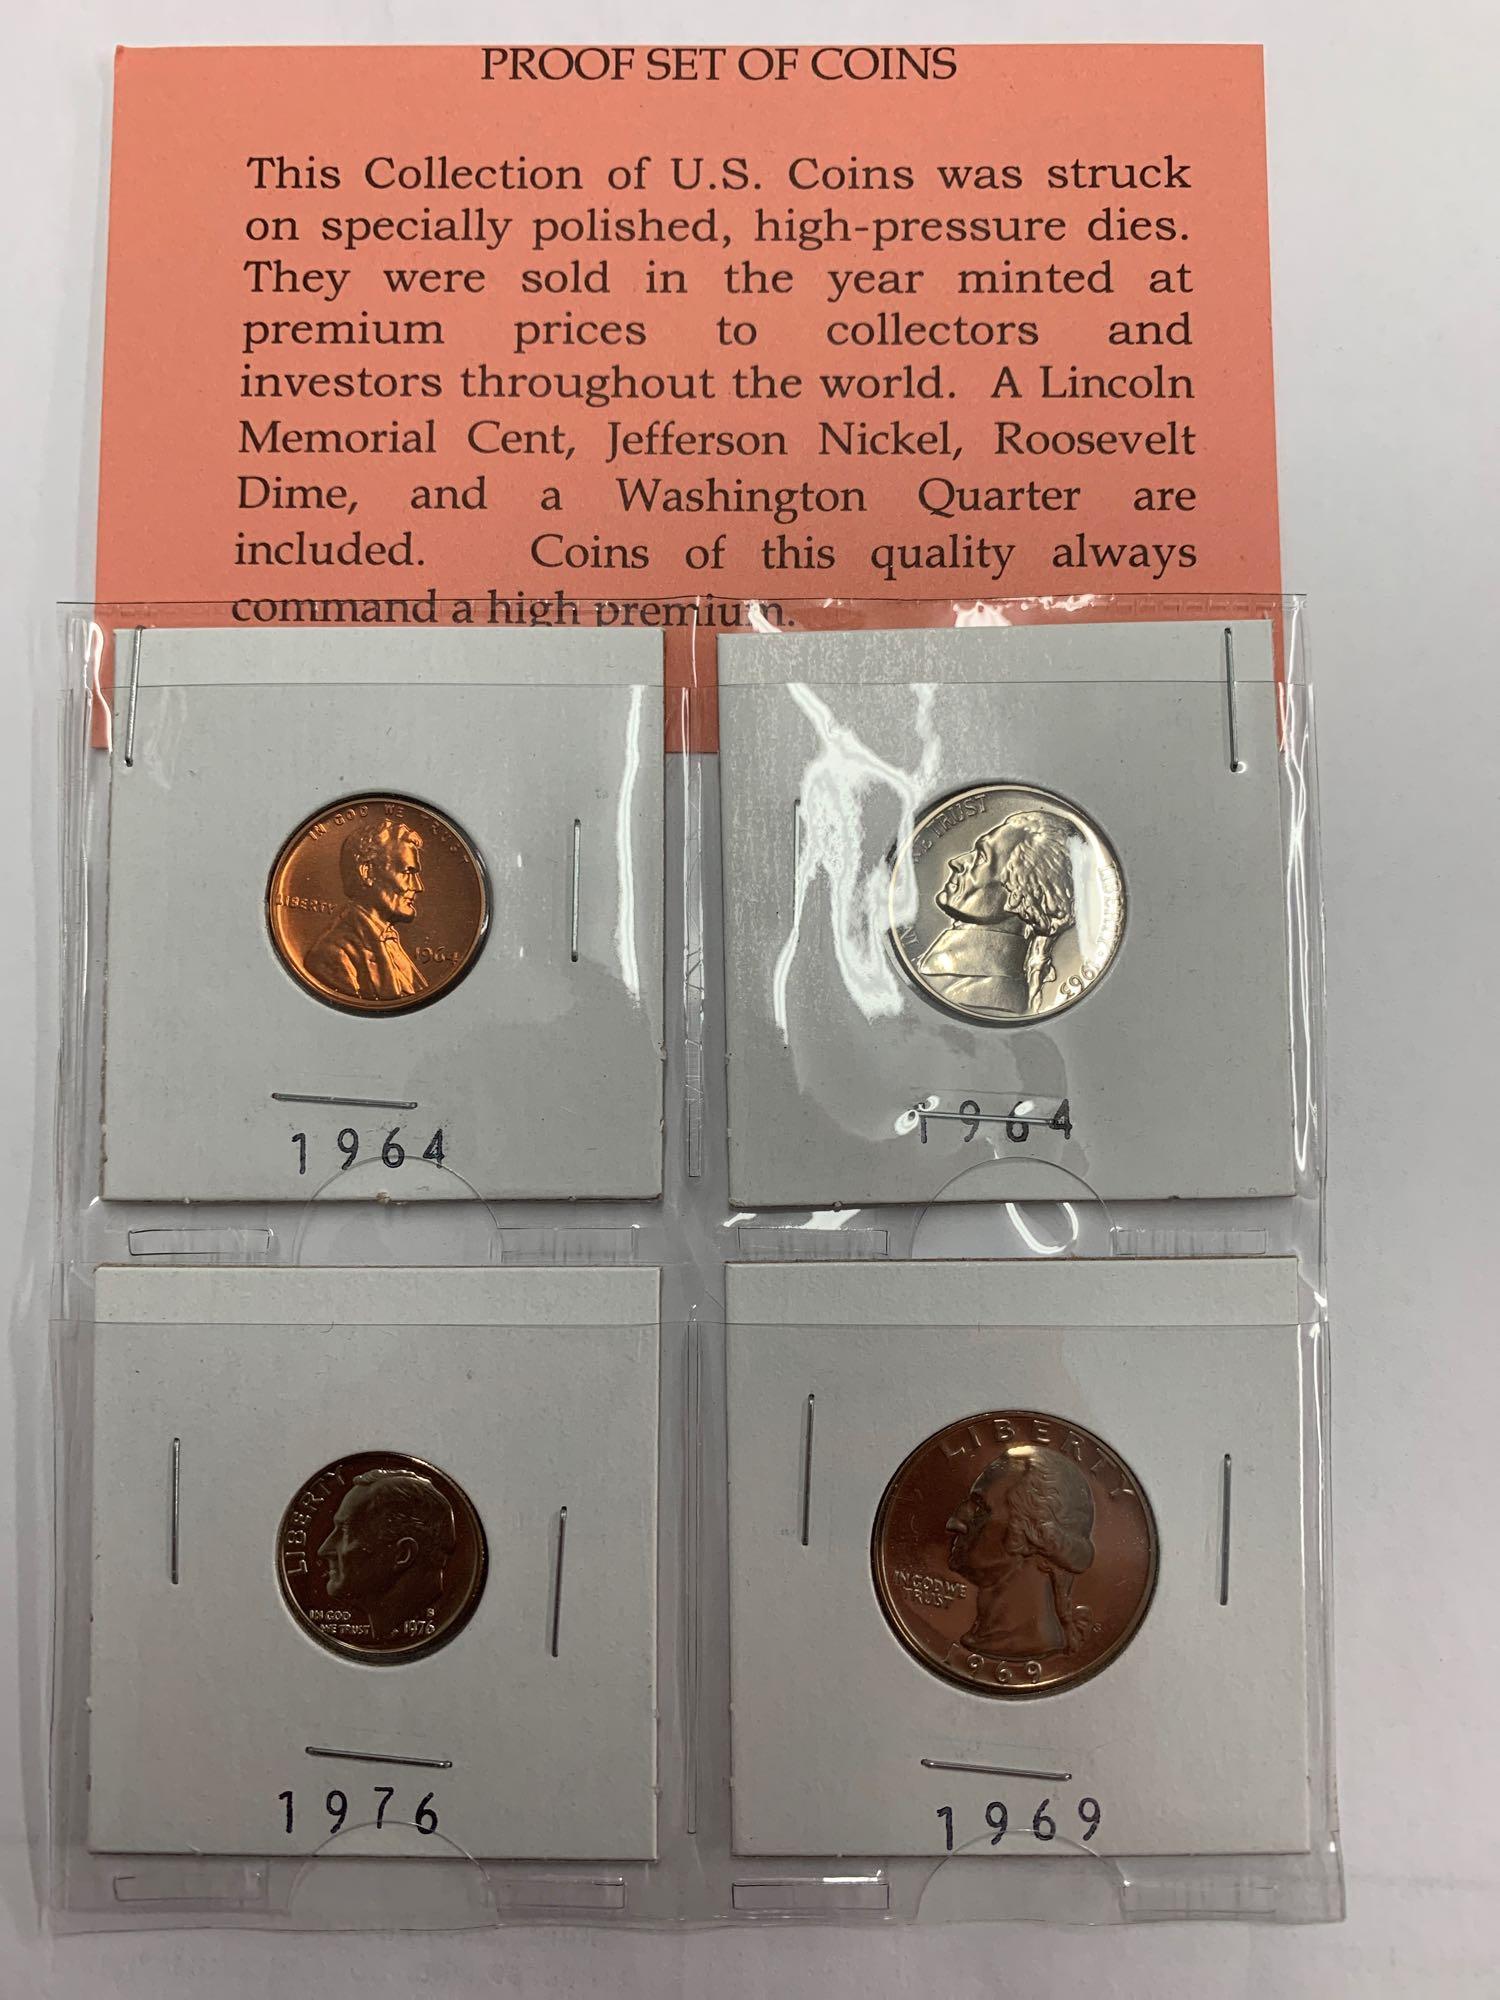 Collection U.S. Proof Set of Coins